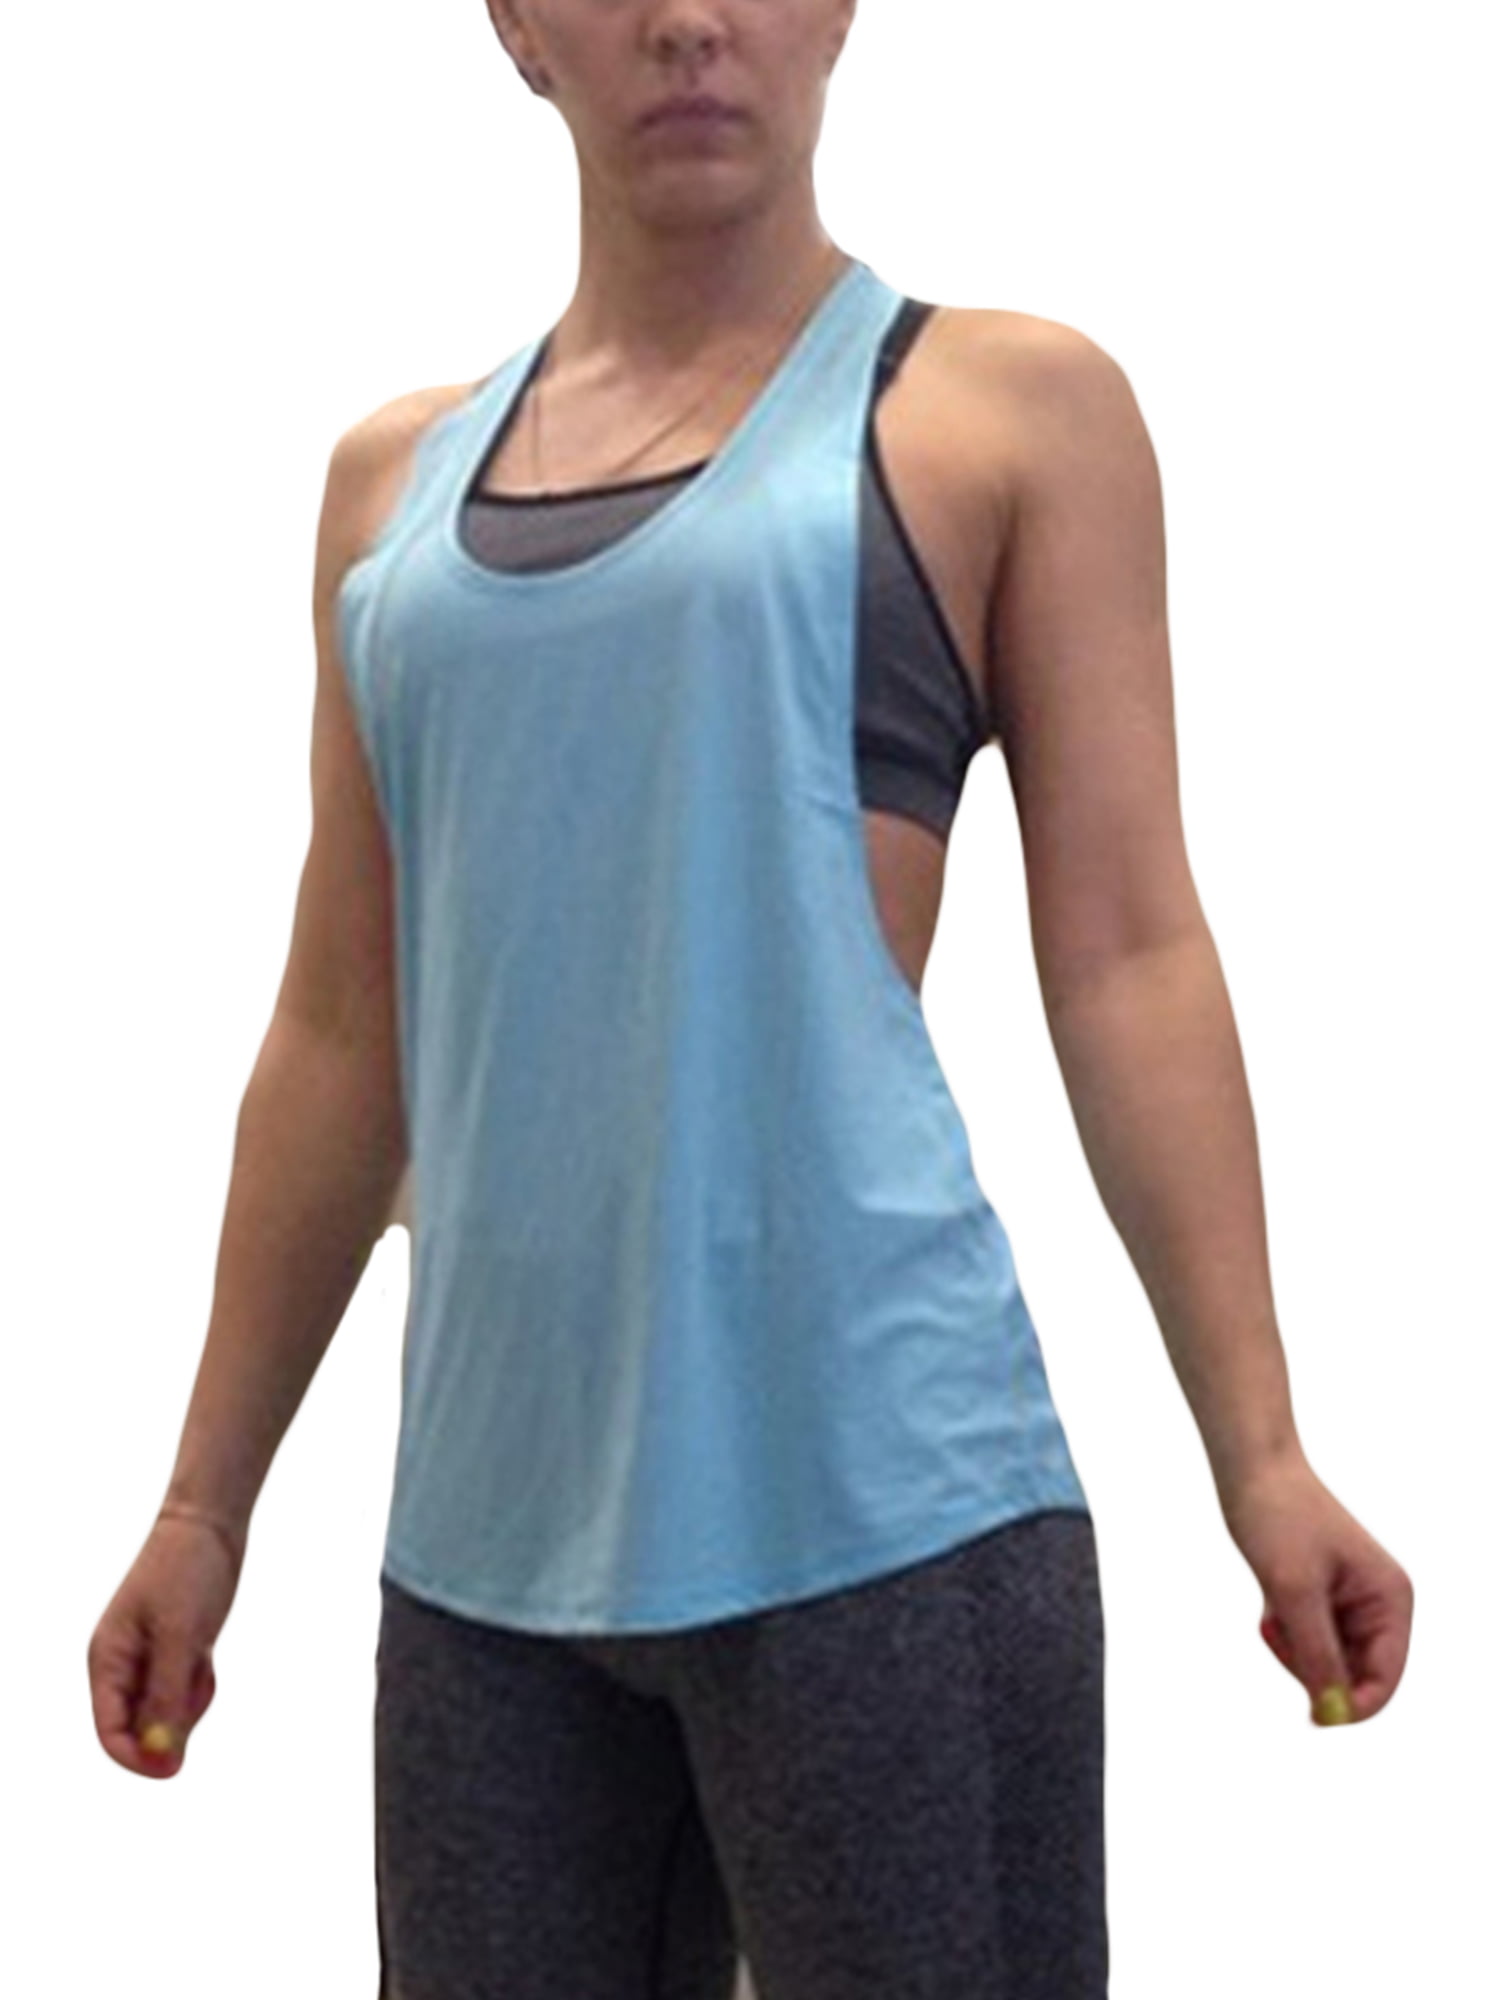 Workout Tops for Women Loose Fit Yoga Shirts Running Clothes Athletic Tank Exercise Vest Cross Back Solid Sleeveless Blouse